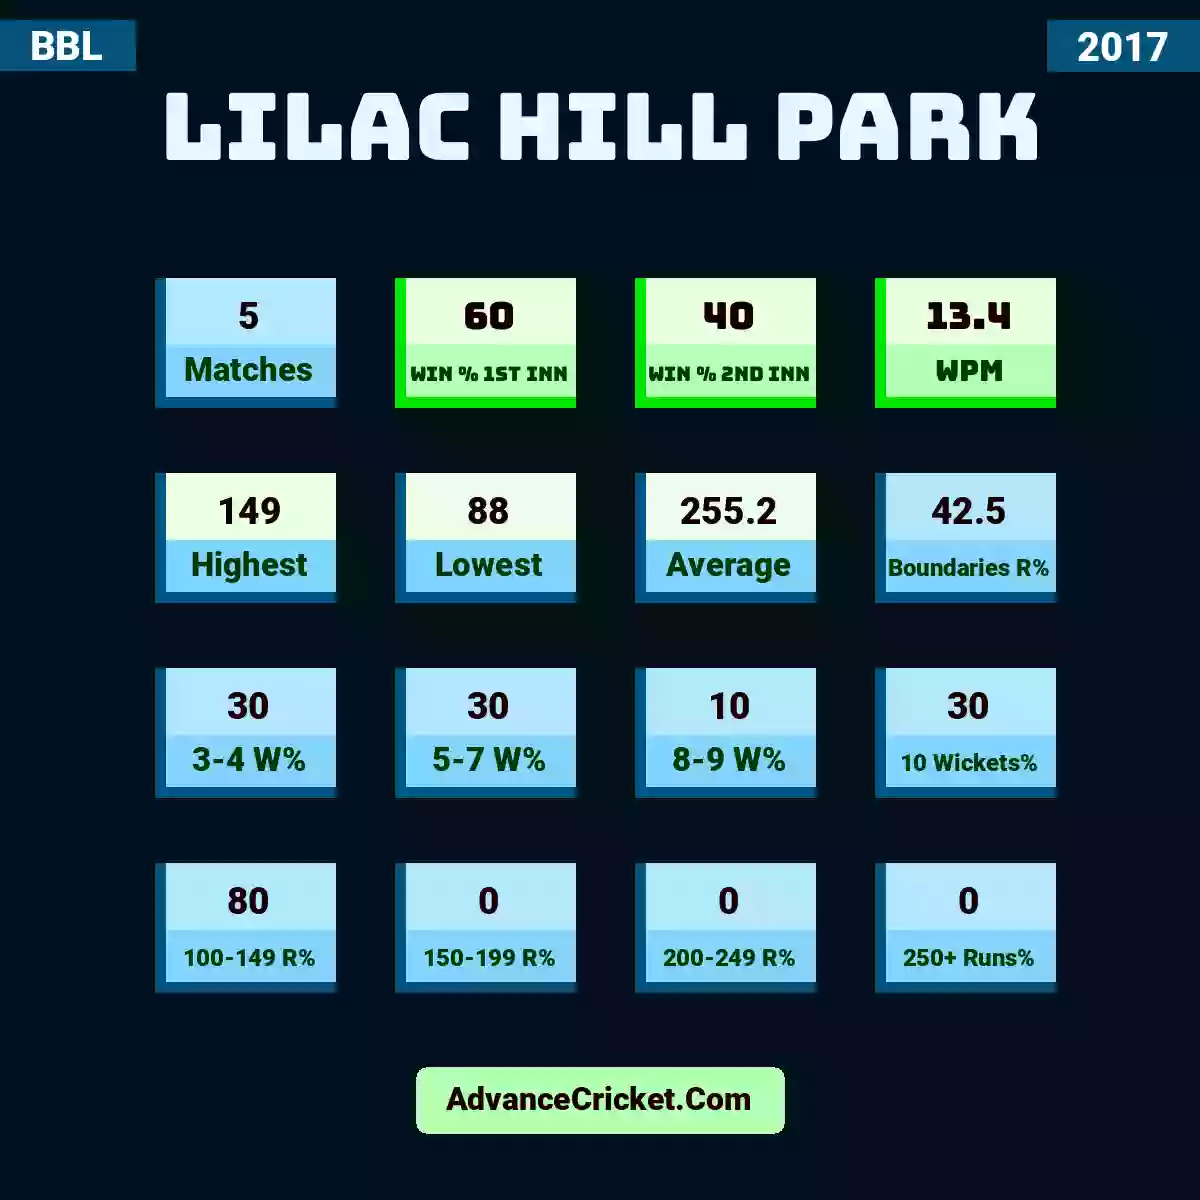 Image showing Lilac Hill Park with Matches: 5, Win % 1st Inn: 60, Win % 2nd Inn: 40, WPM: 13.4, Highest: 149, Lowest: 88, Average: 255.2, Boundaries R%: 42.5, 3-4 W%: 30, 5-7 W%: 30, 8-9 W%: 10, 10 Wickets%: 30, 100-149 R%: 80, 150-199 R%: 0, 200-249 R%: 0, 250+ Runs%: 0.